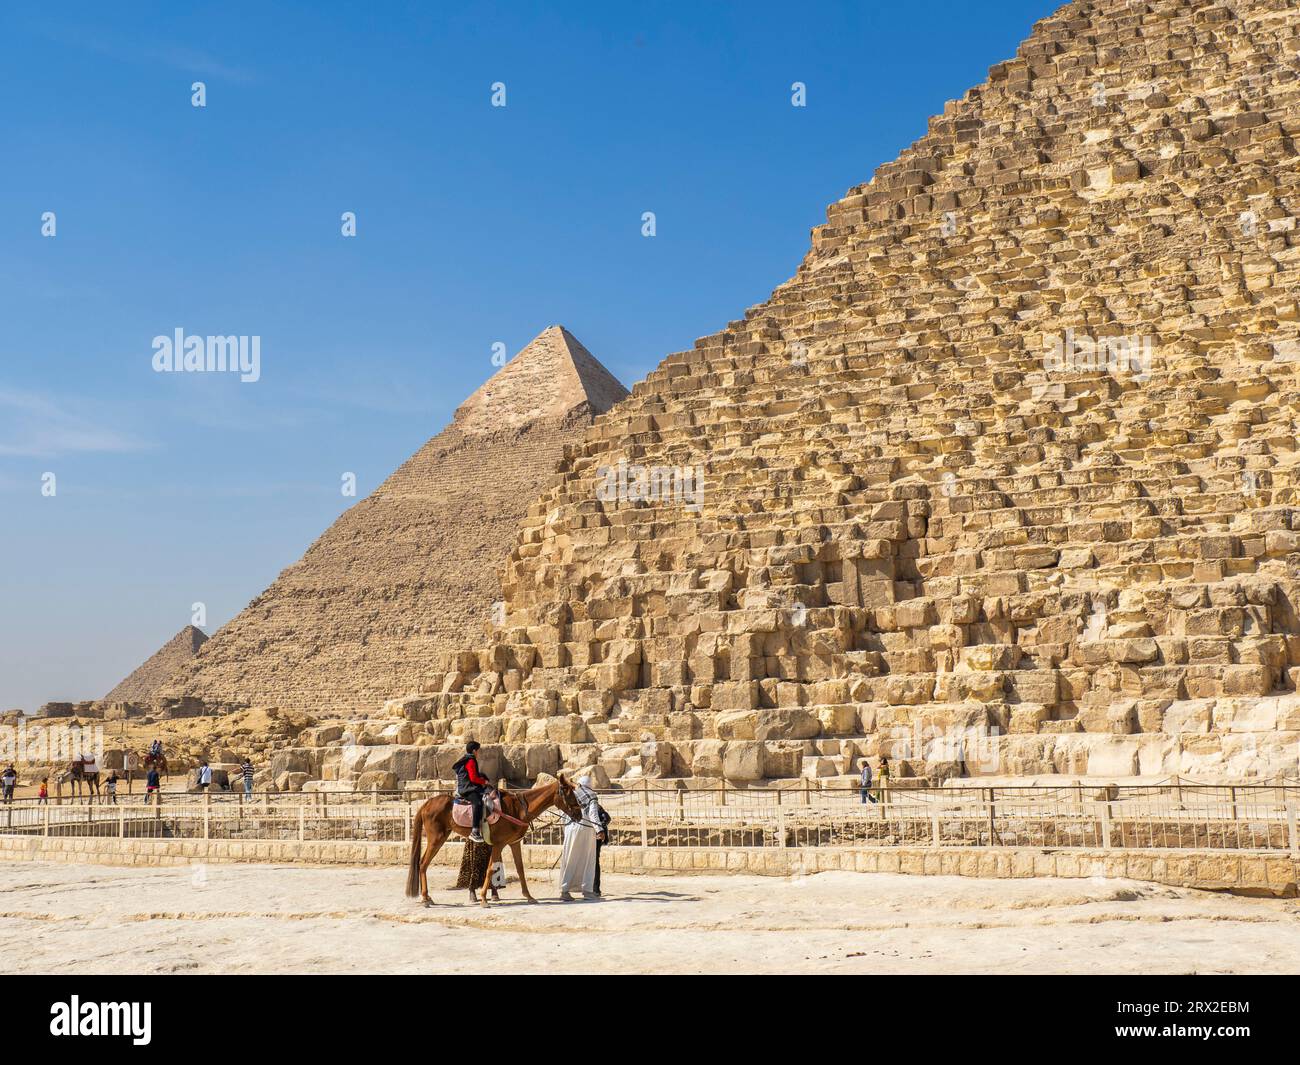 Tourists on camel ride in front of the Great Pyramid of Giza, the oldest of the Seven Wonders of the World, Giza, near Cairo, Egypt Stock Photo